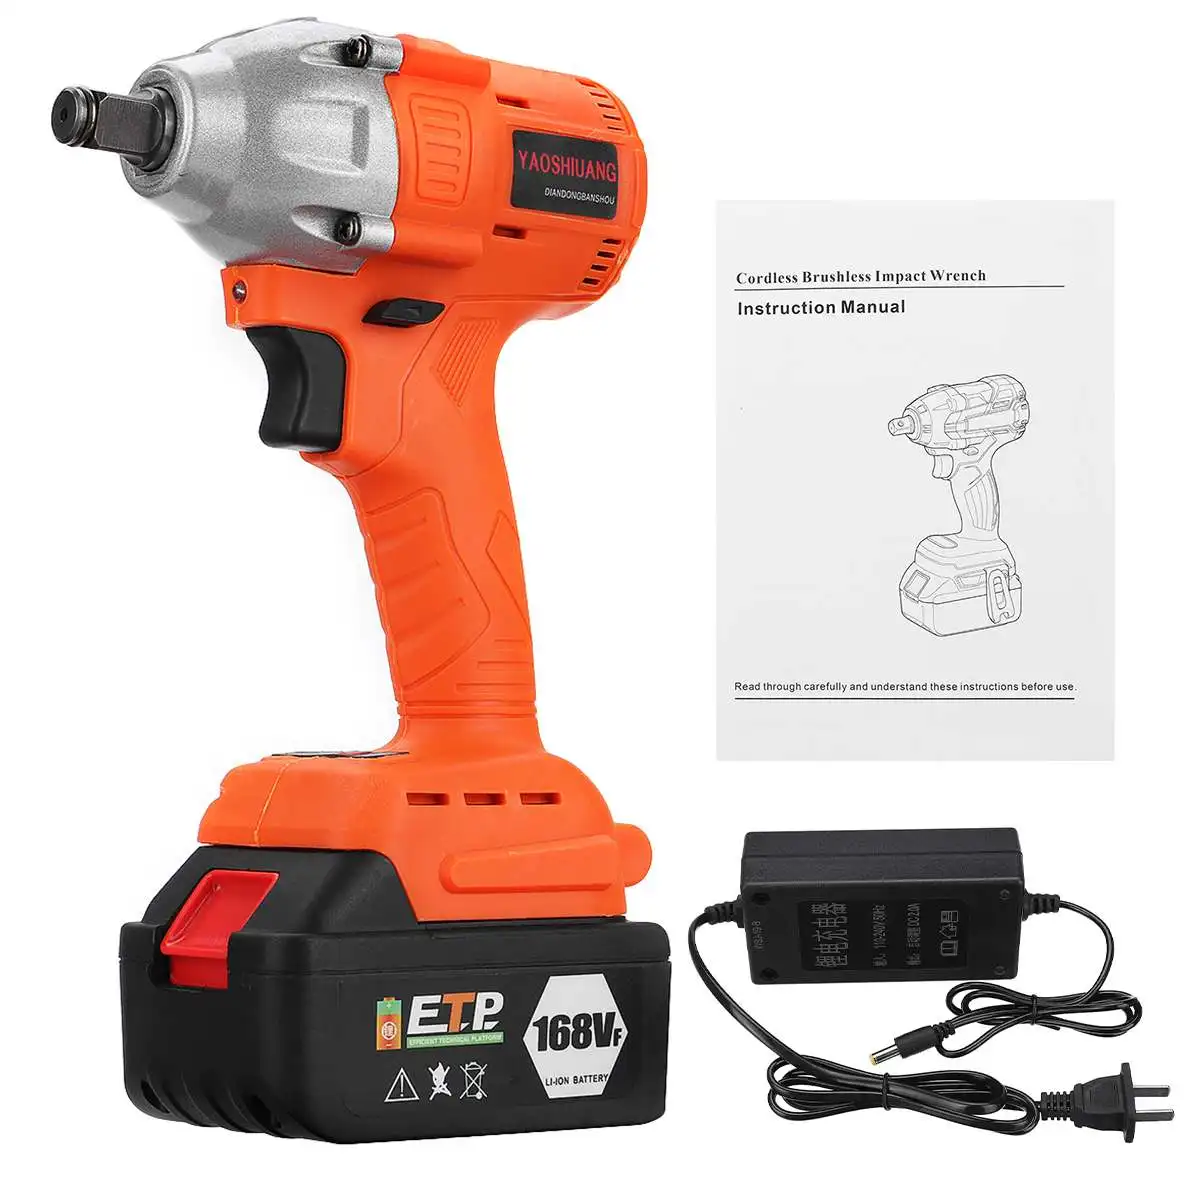 

21V Electric Brushless Impact Wrench 630N.m Electric Impact Wrench 1/2 Socket Power DIY Tools with 16800mAh Battery